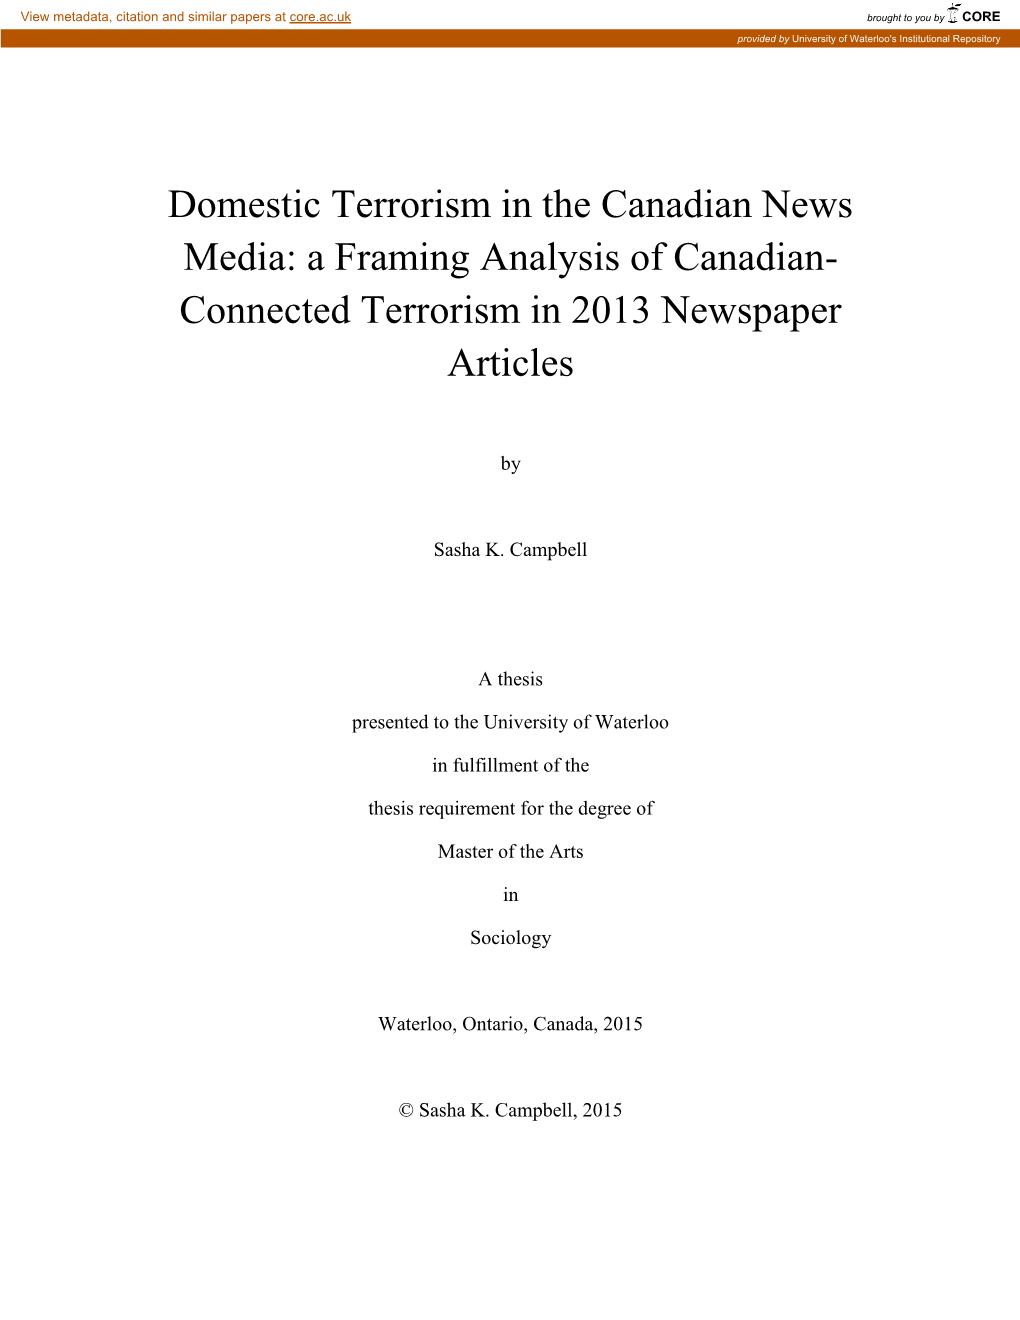 Domestic Terrorism in the Canadian News Media: a Framing Analysis of Canadian- Connected Terrorism in 2013 Newspaper Articles